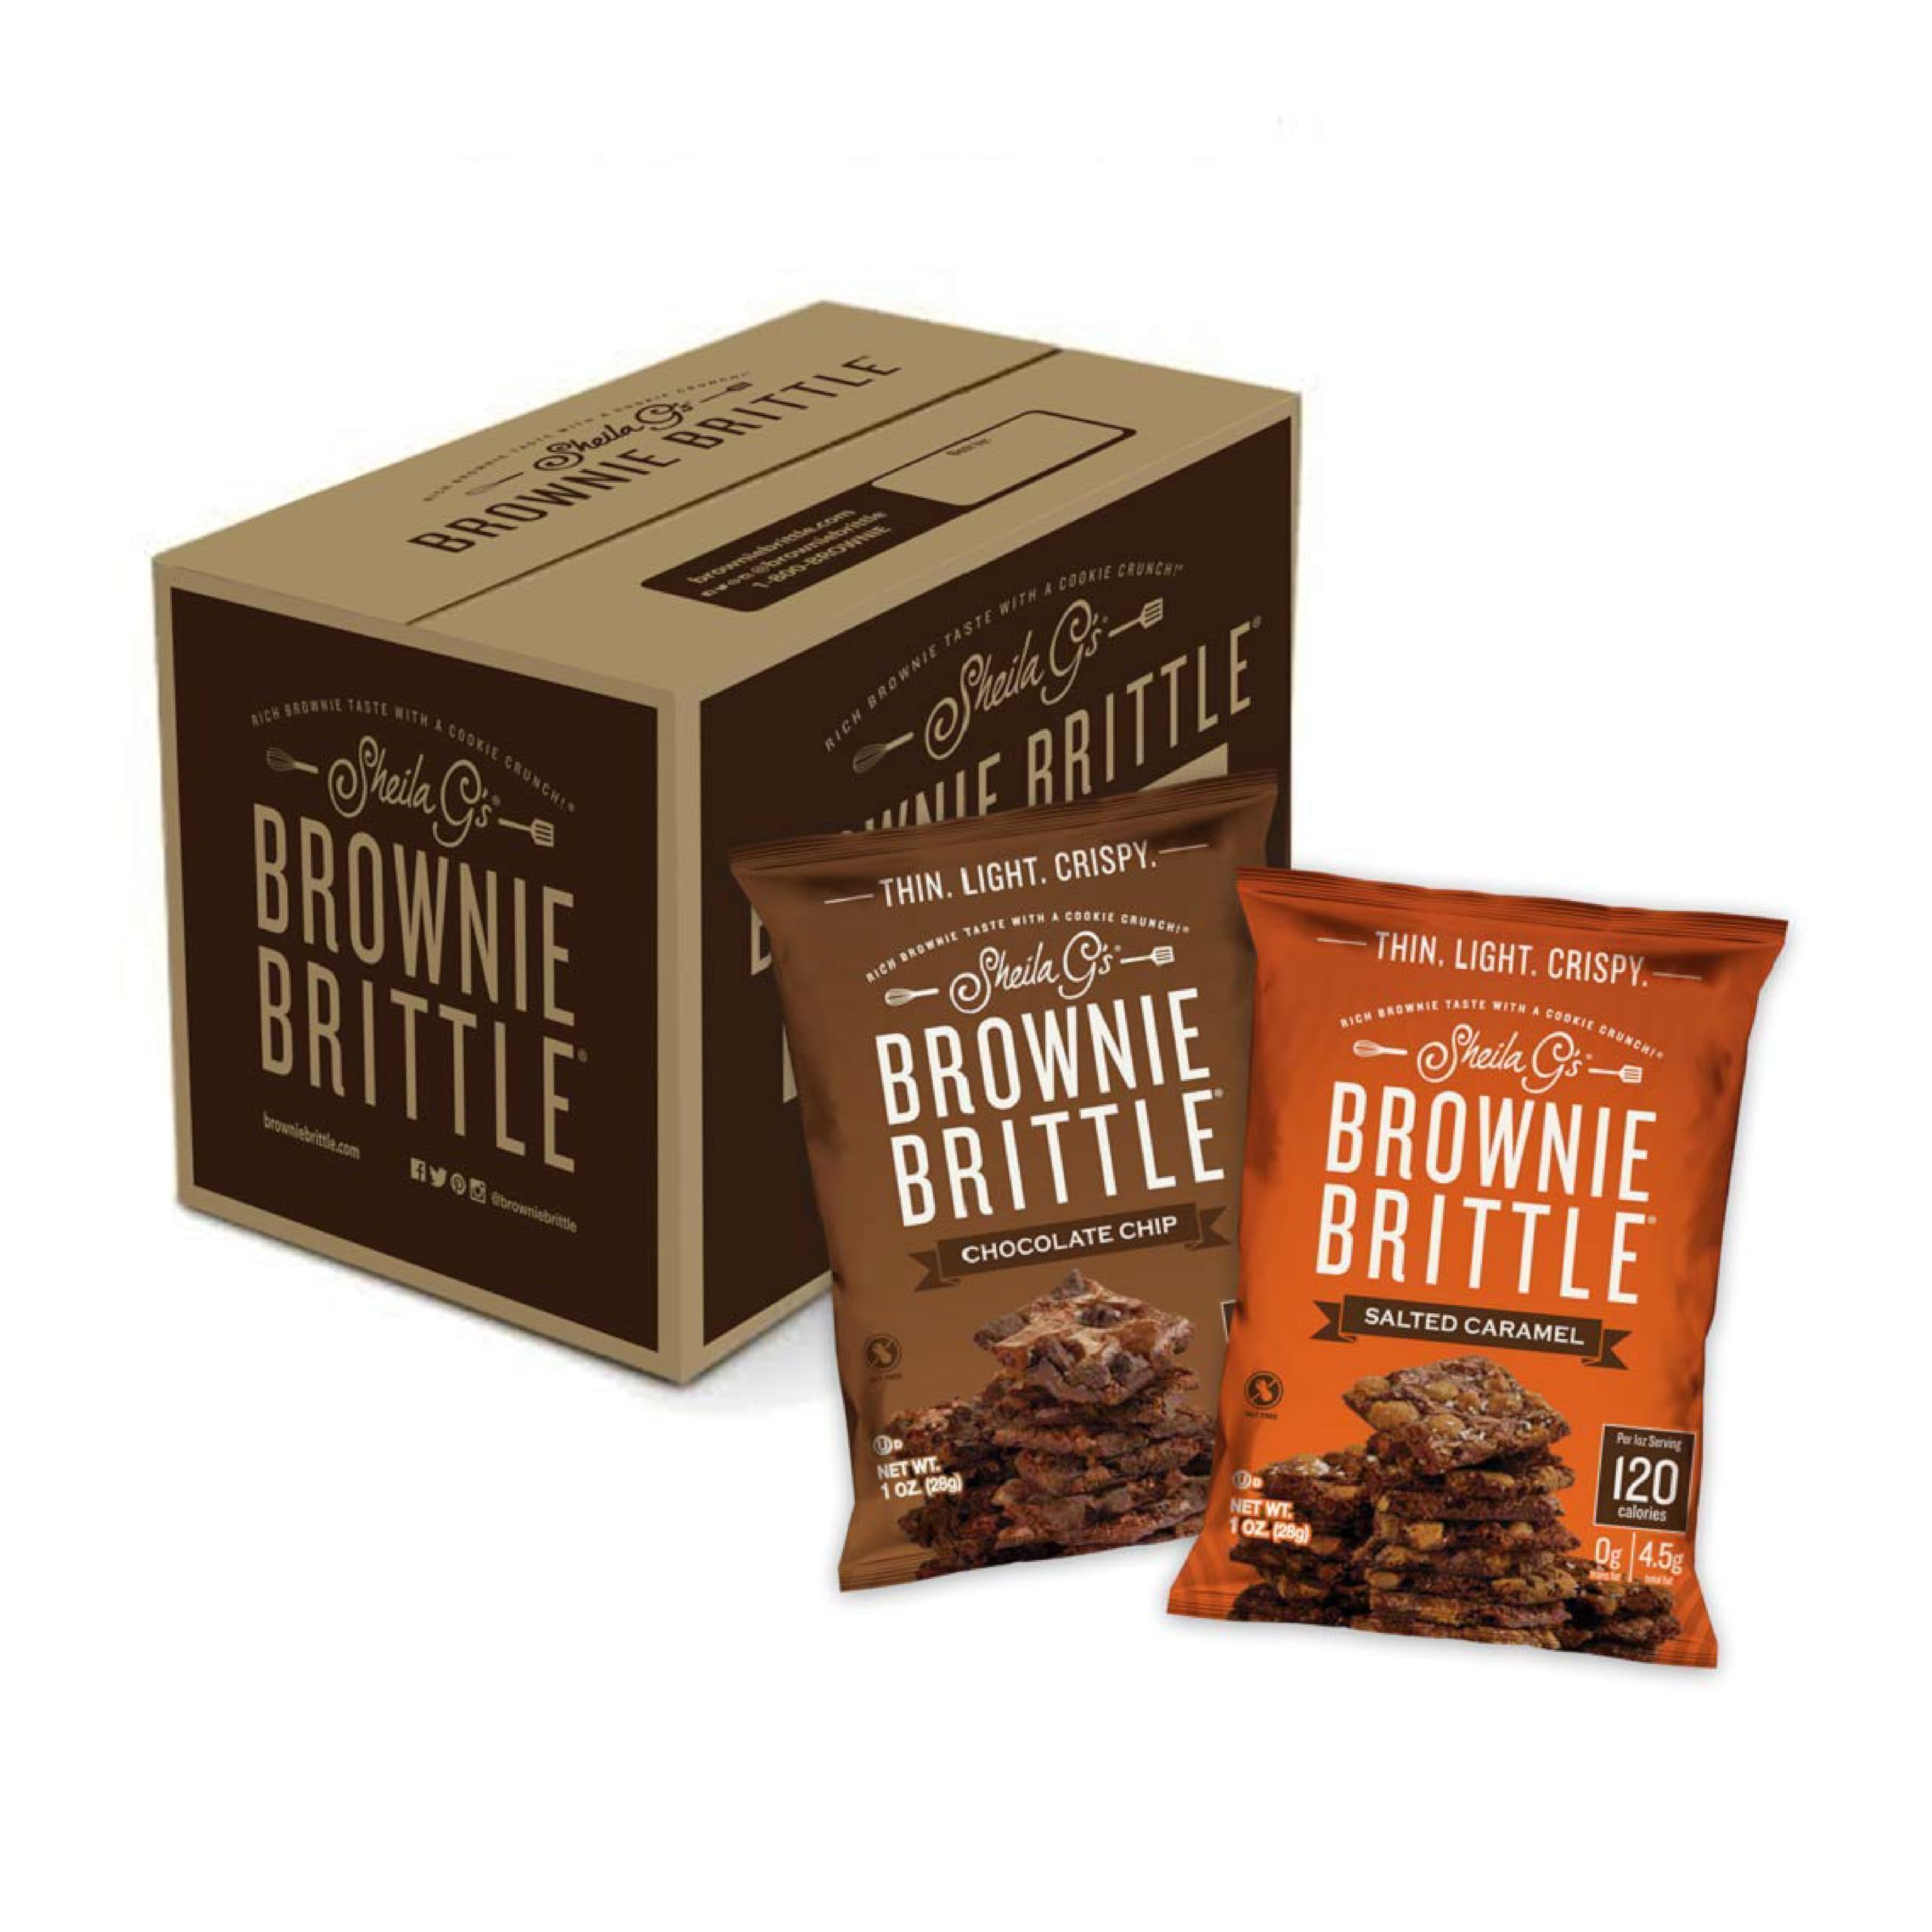 *Price Drop* 20-Count 1-Oz Sheila G's Brownie Brittle (Chocolate Chip & Salted Caramel) $9.15 w/ S&S + Free Shipping w/ Prime or on $35+